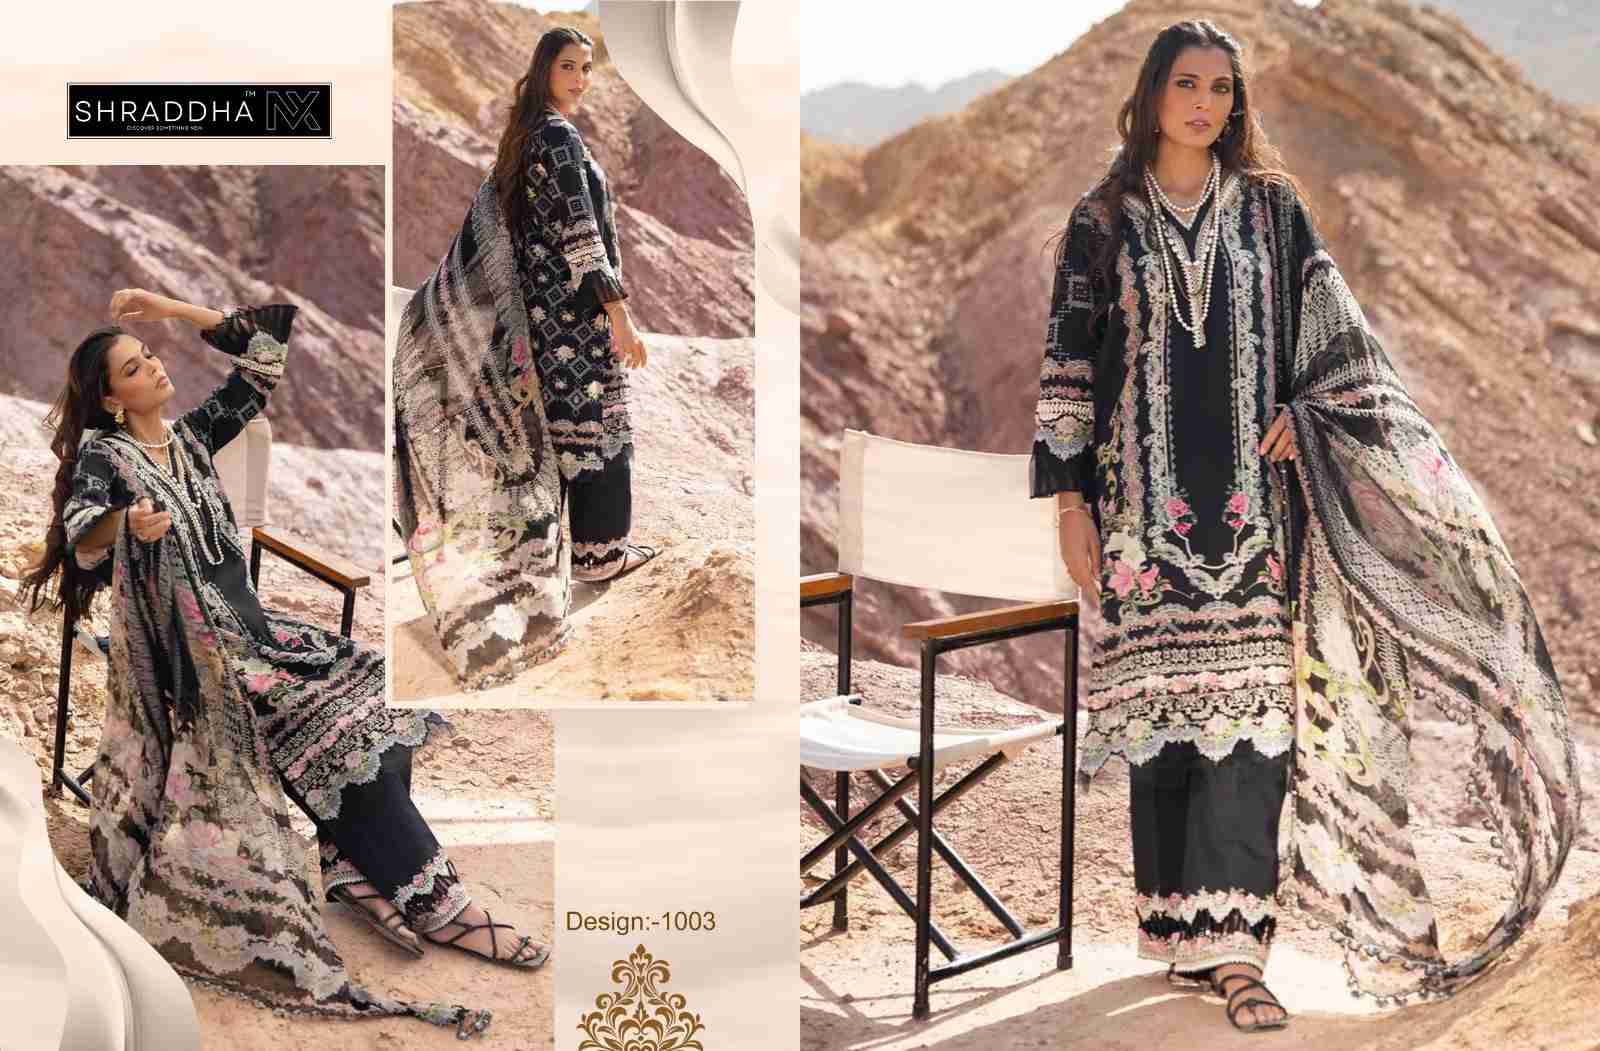 Queen Court Vol-1 Nx By Shraddha Nx 1001 To 1004 Series Beautiful Pakistani Suits Colorful Stylish Fancy Casual Wear & Ethnic Wear Lawn Cotton Print With Embroidered Dresses At Wholesale Price